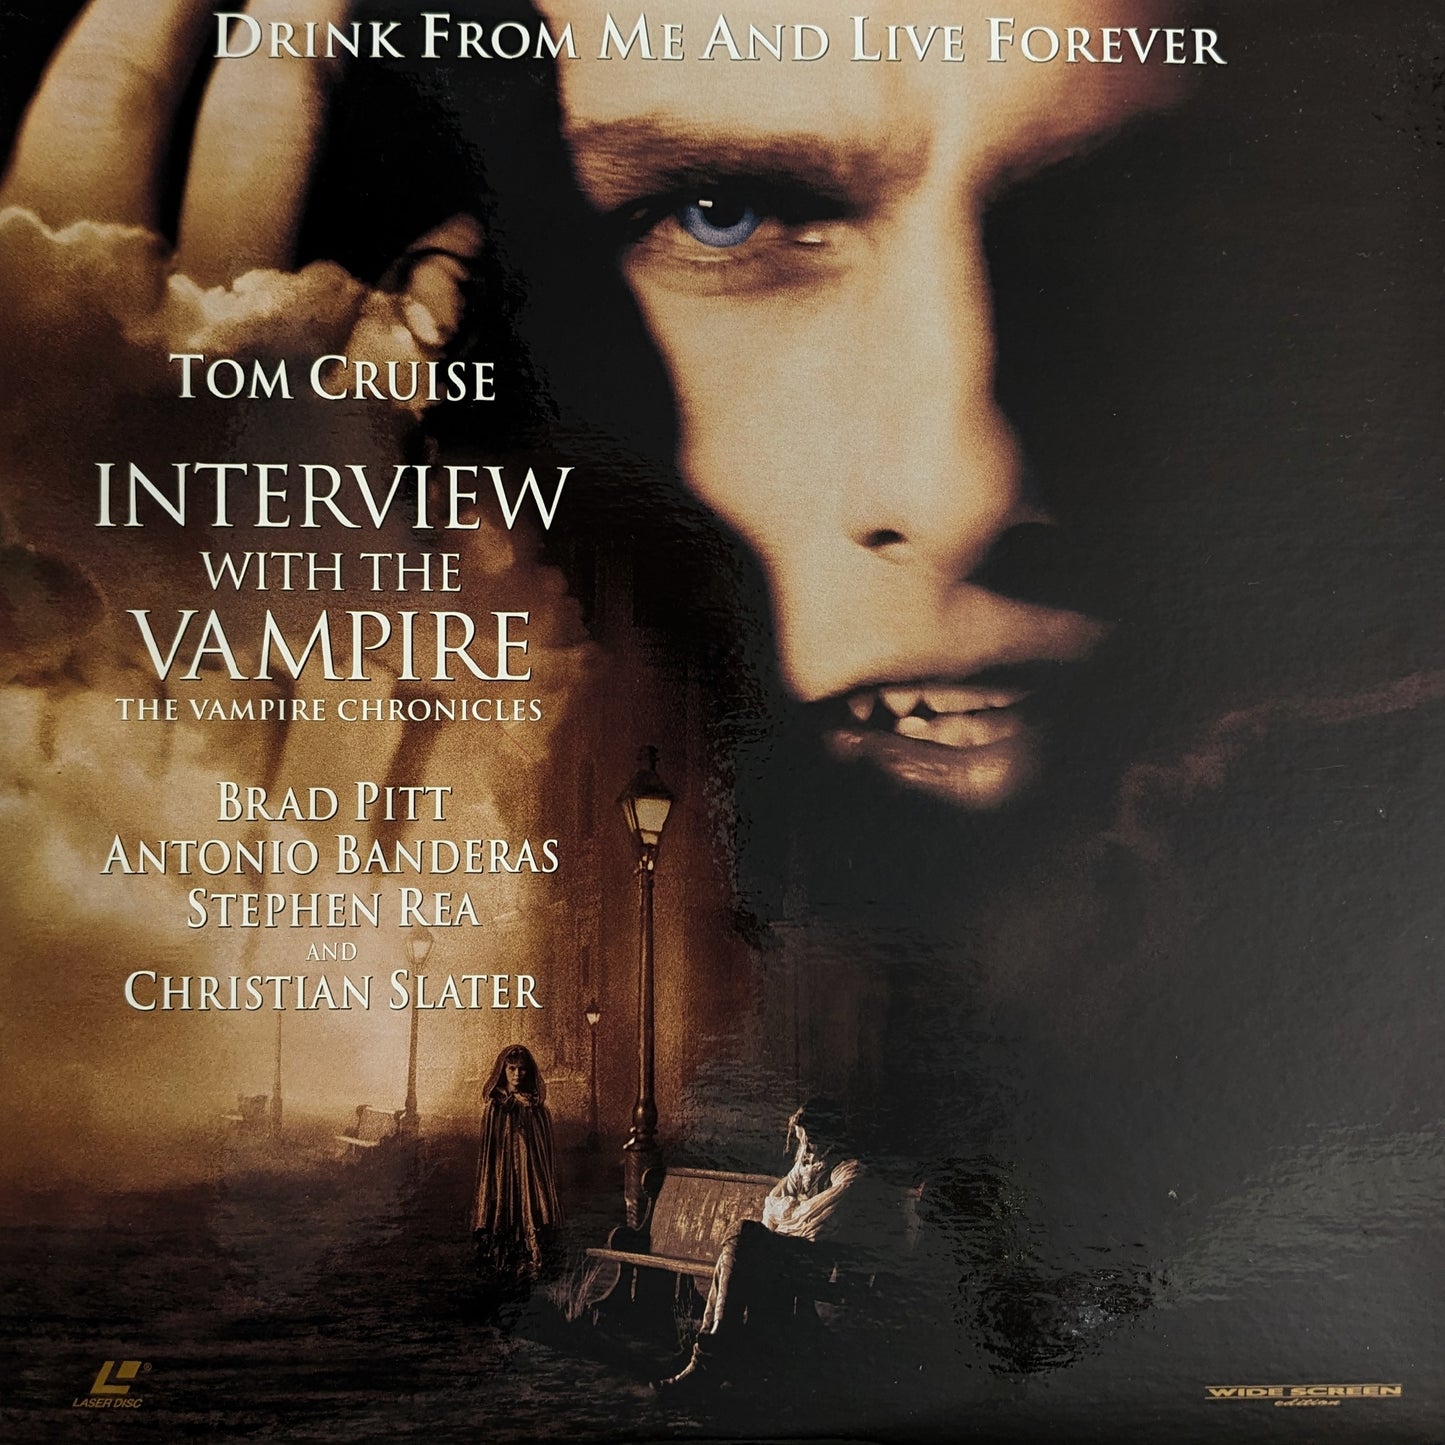 Interview With A Vampire: The Vampire Chronicles (1994) North American Laserdisc